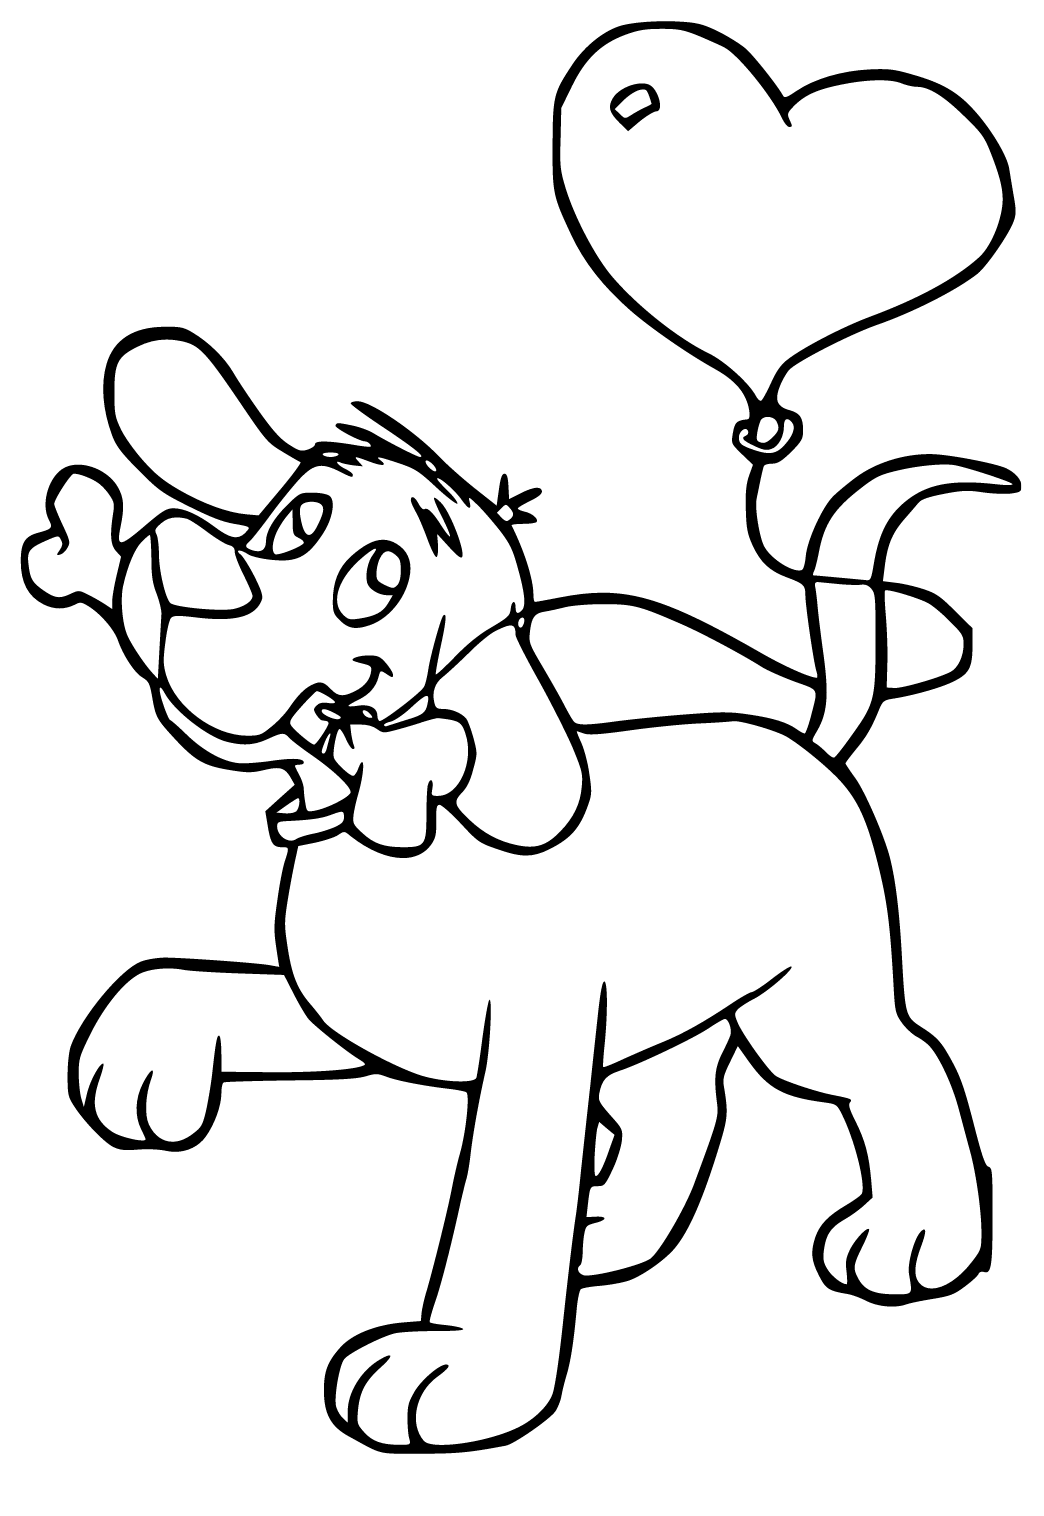 Free printable clifford heart coloring page for adults and kids